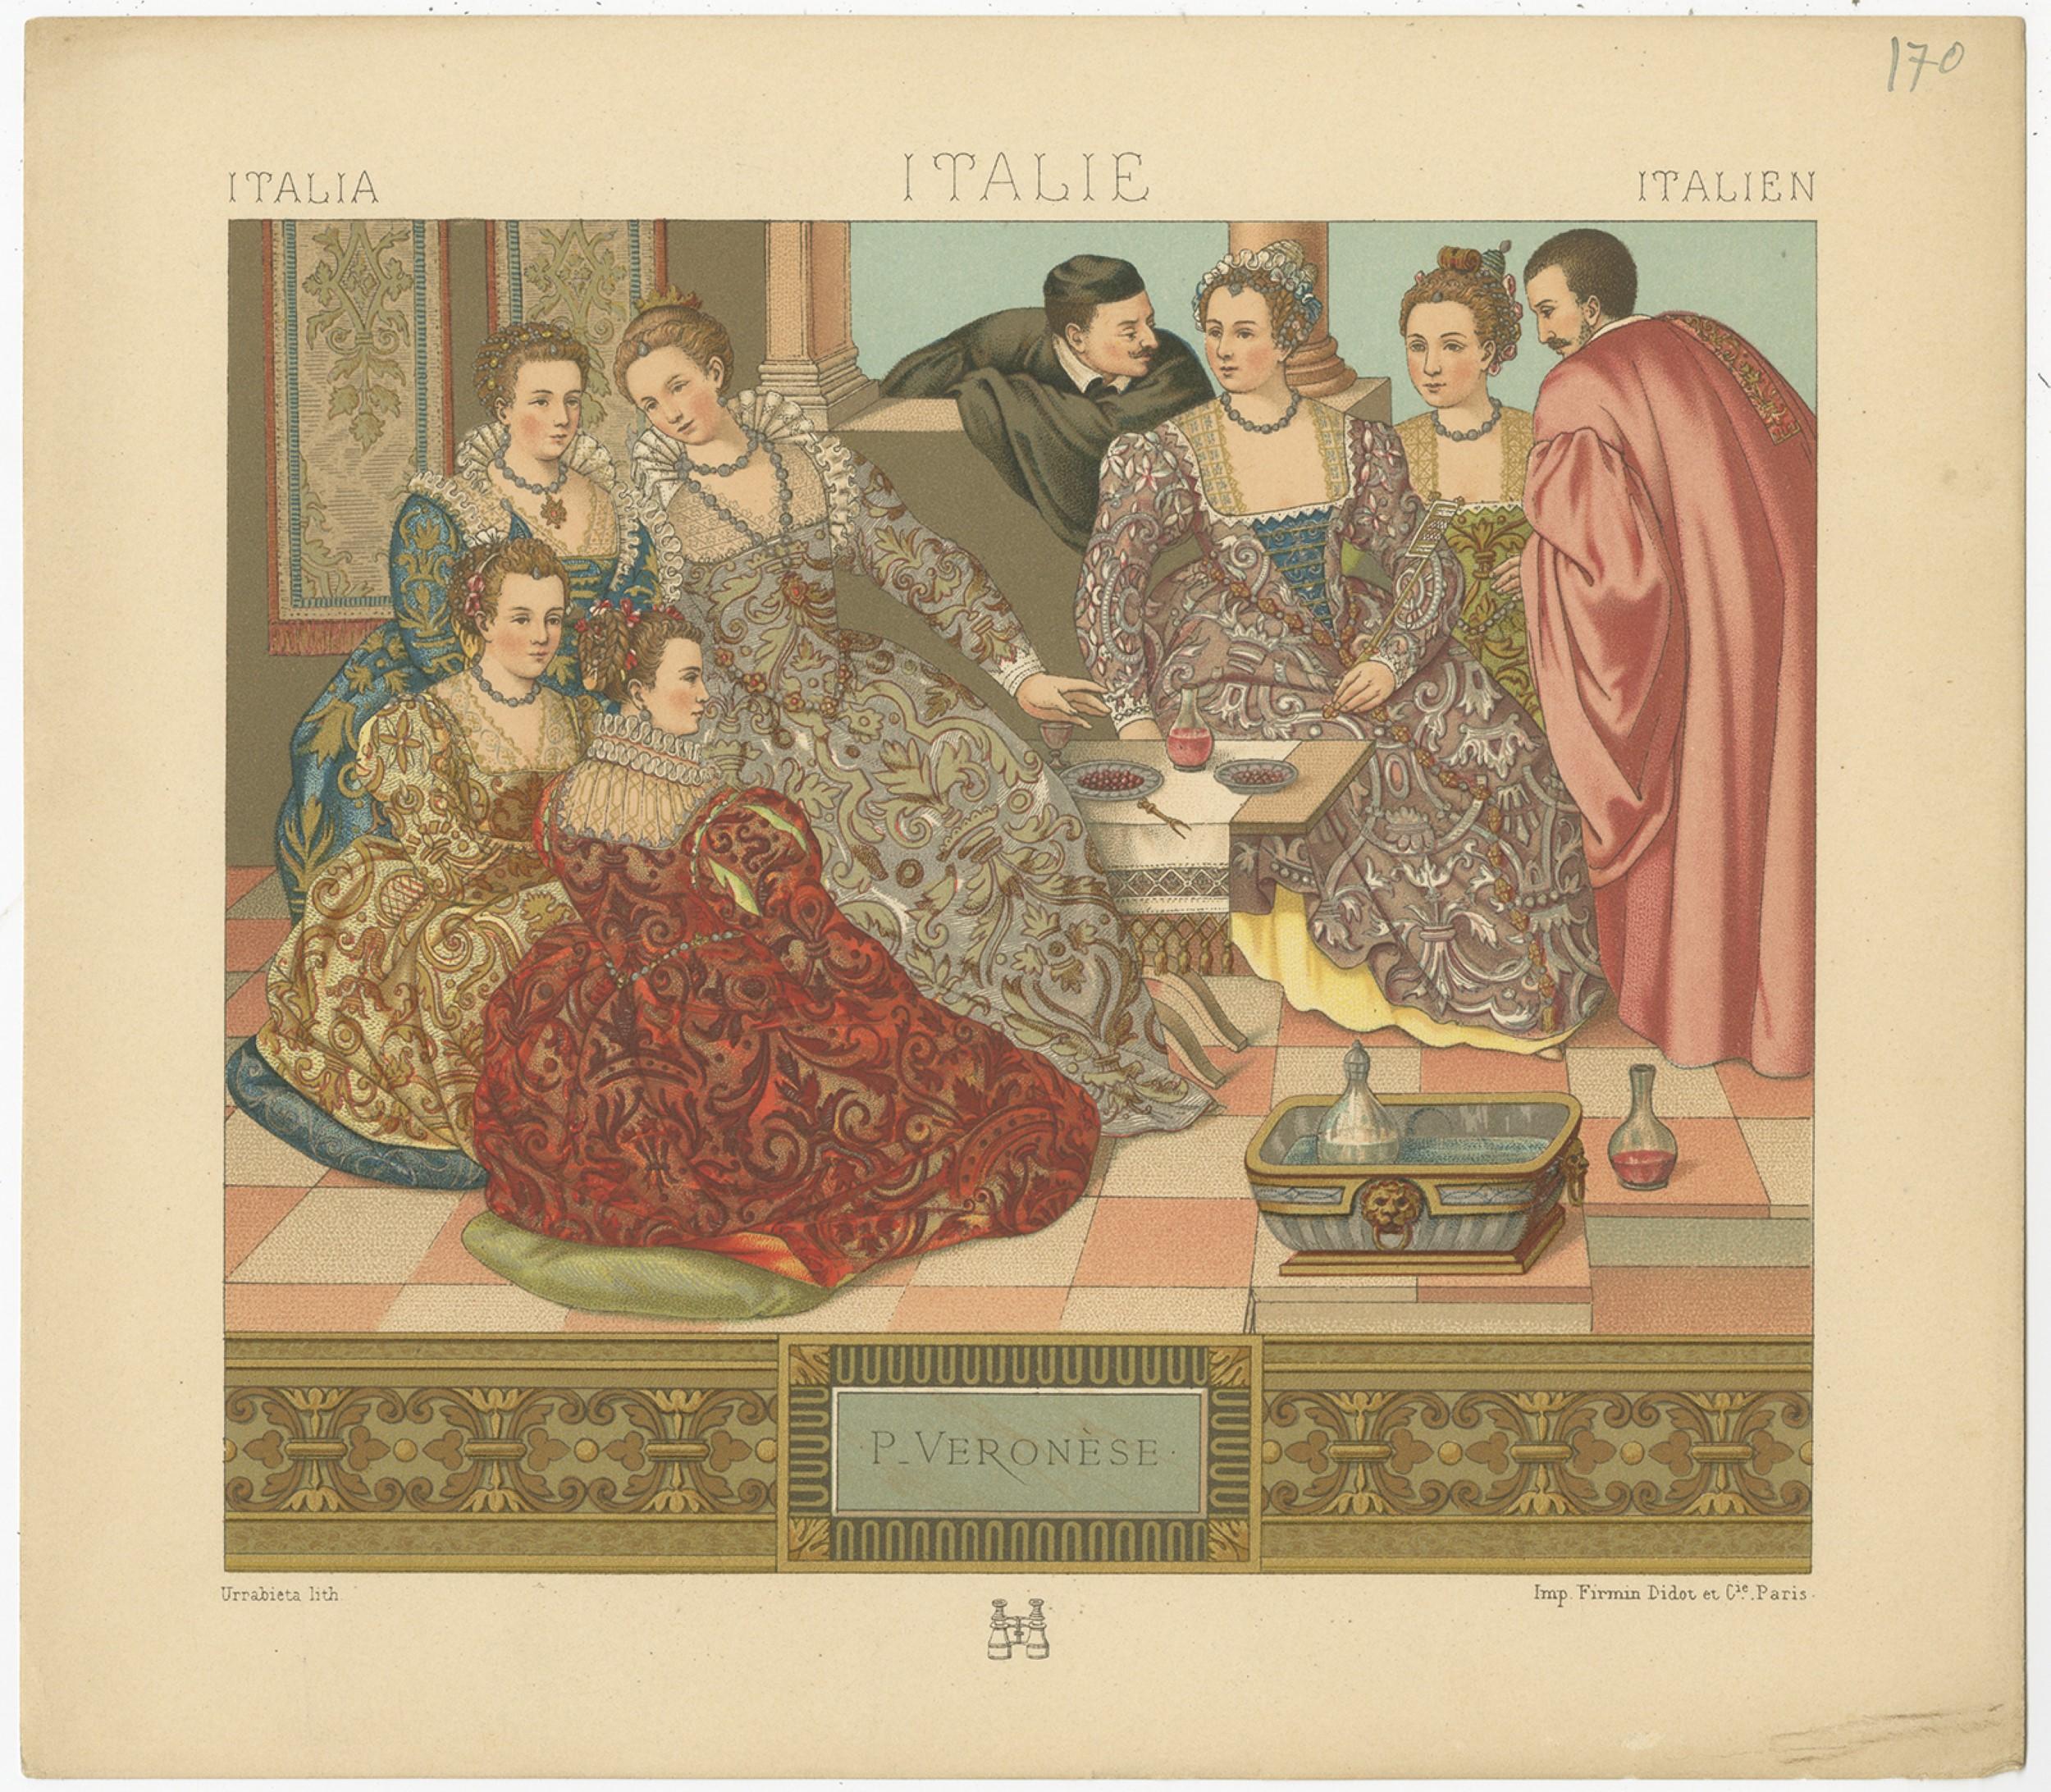 Antique print titled 'Italia - Italie - Italien'. Chromolithograph of Italian P_Veronese Costumes. This print originates from 'Le Costume Historique' by M.A. Racinet. Published, circa 1880.
 
  